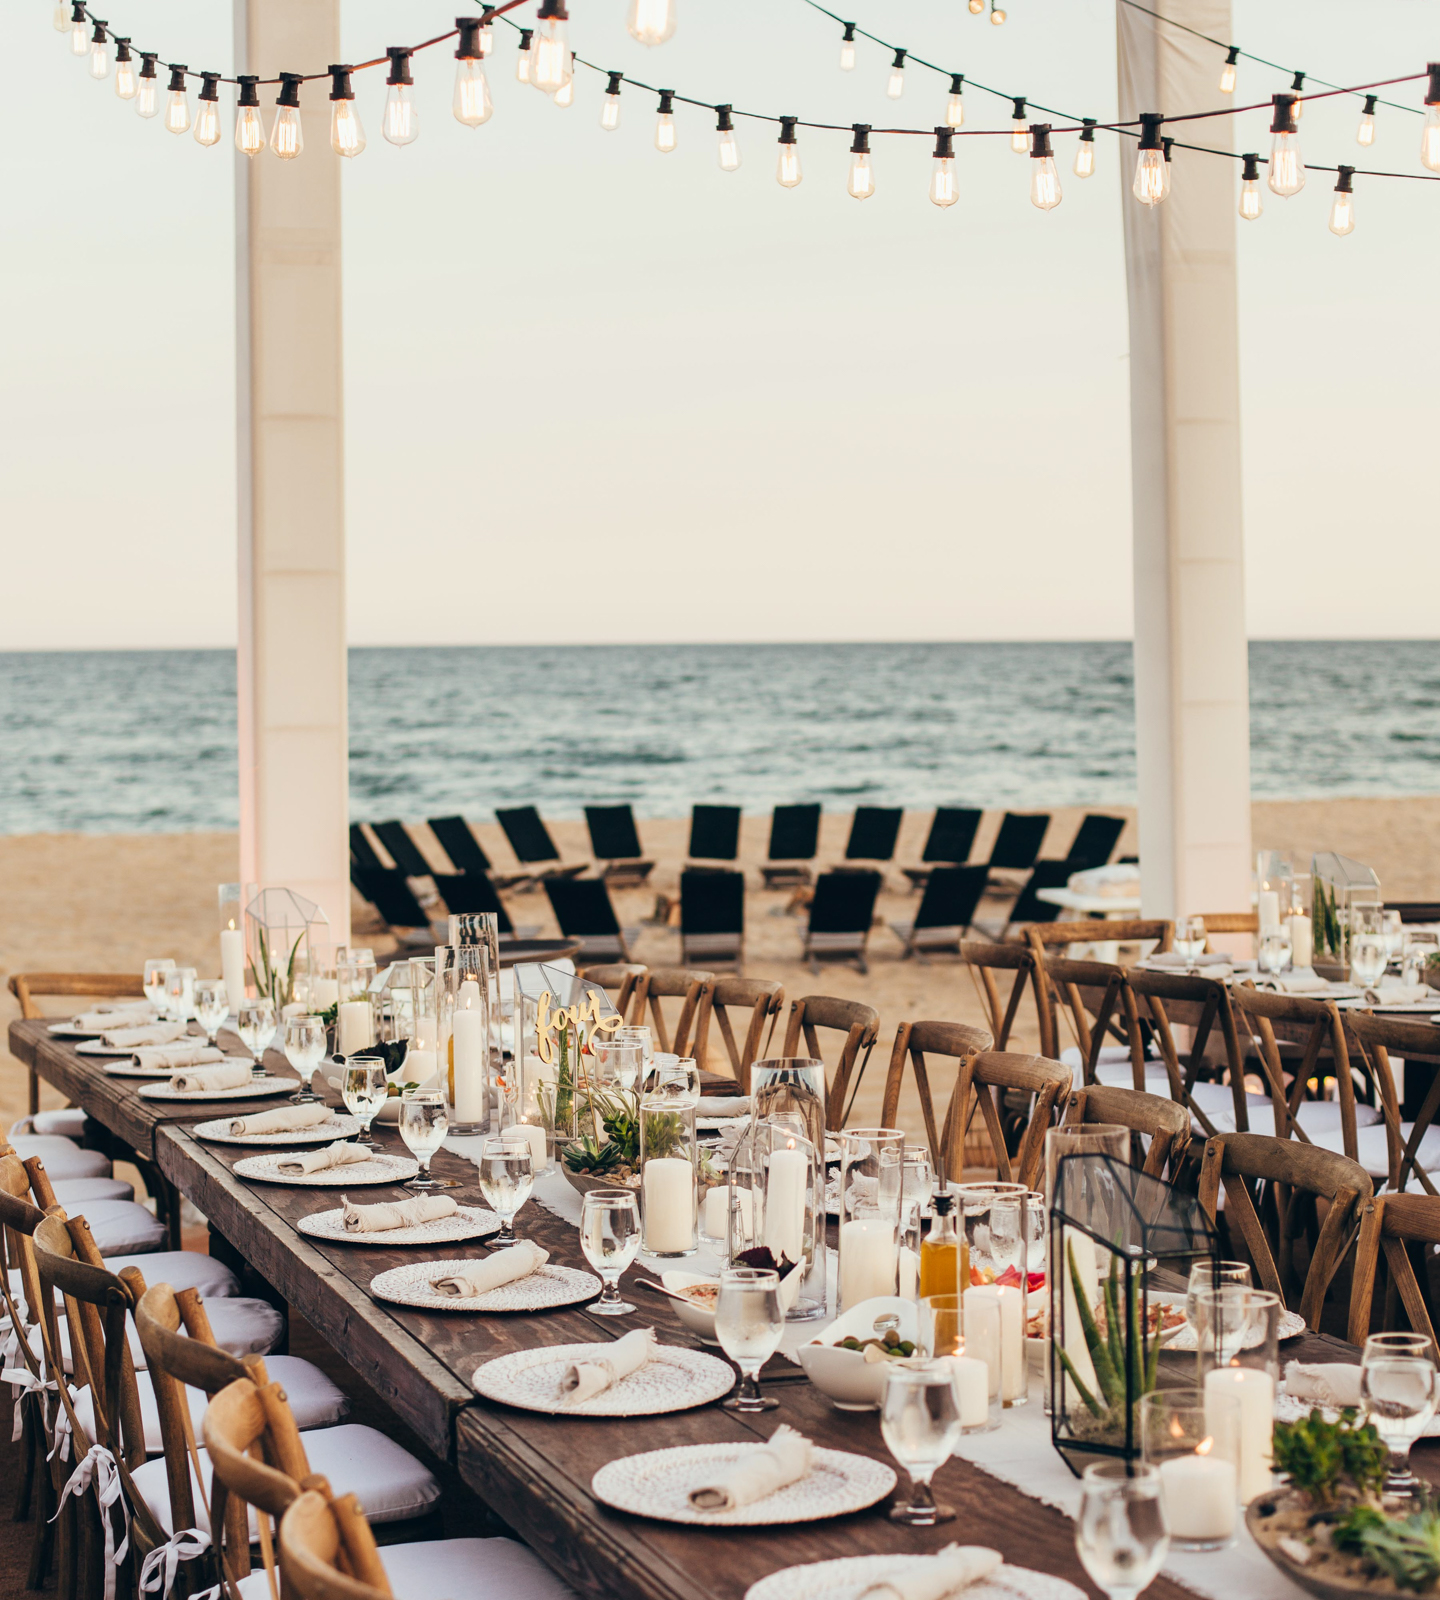  View from beach-side long wooden table set for dinner with hanging lights, candles and plant center pieces as sun sets with beach fire-pit in background.